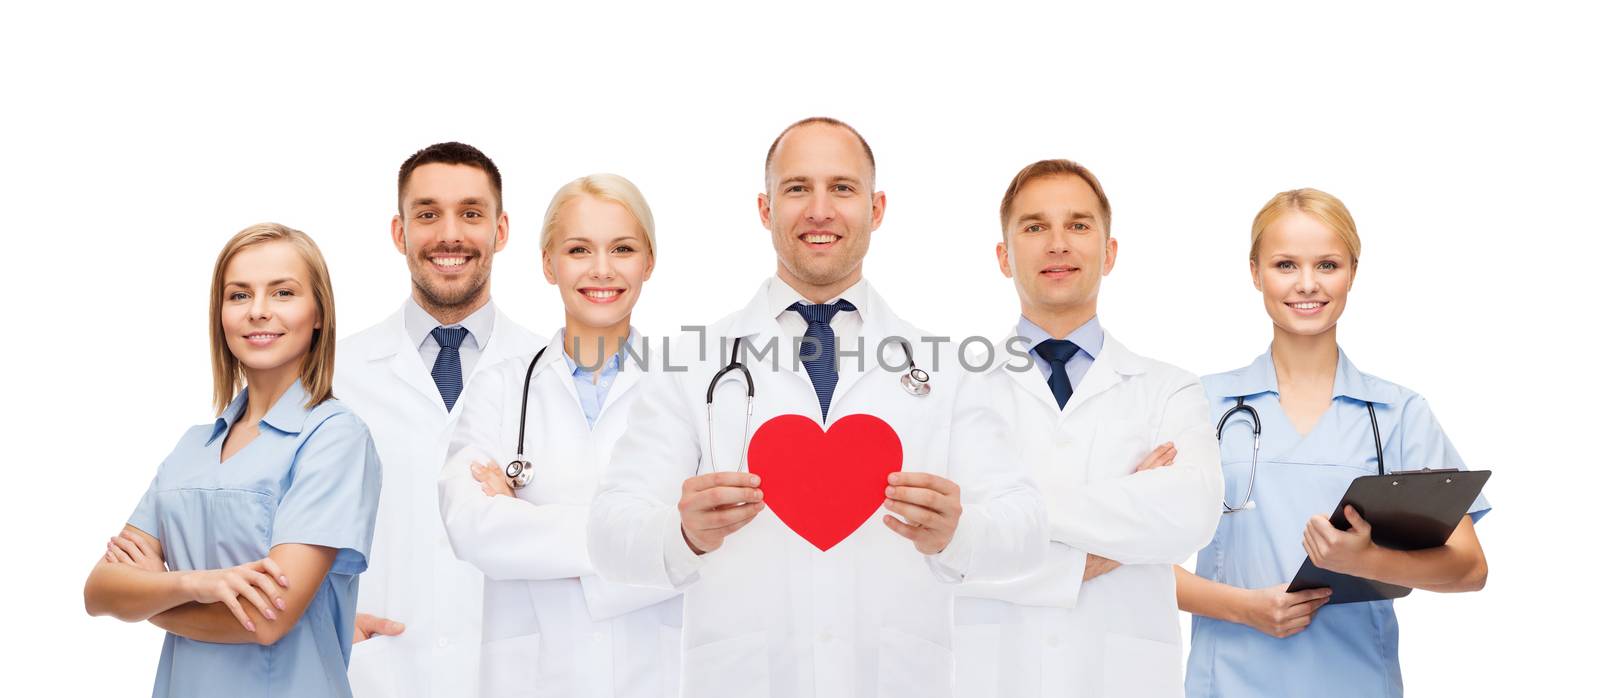 group of smiling doctors with red heart shape by dolgachov